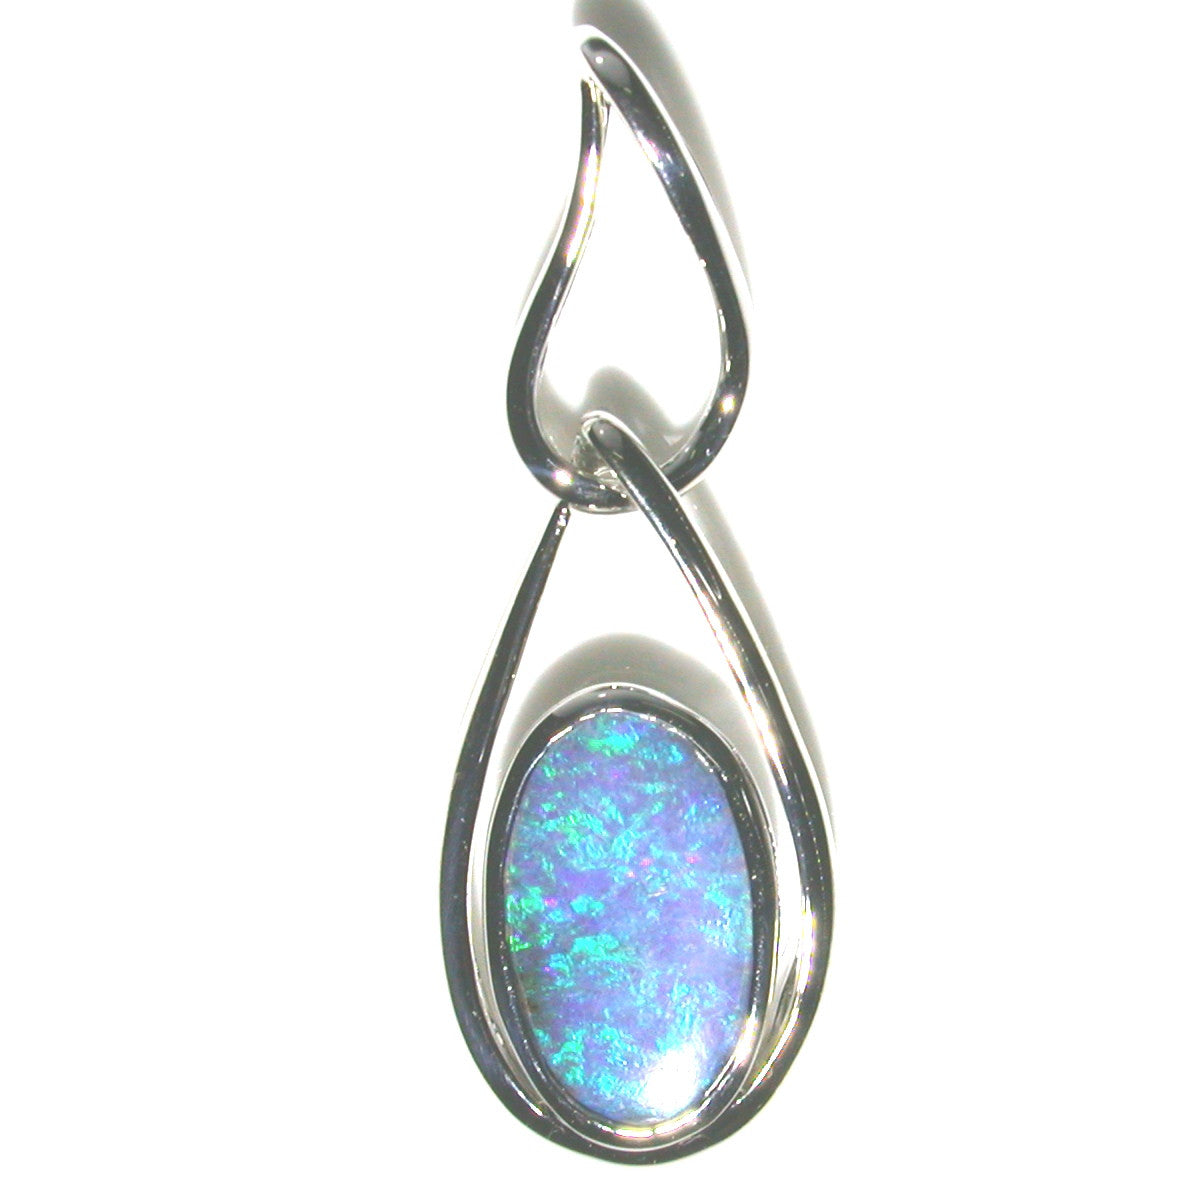 Green and blue solid boulder opal pendant